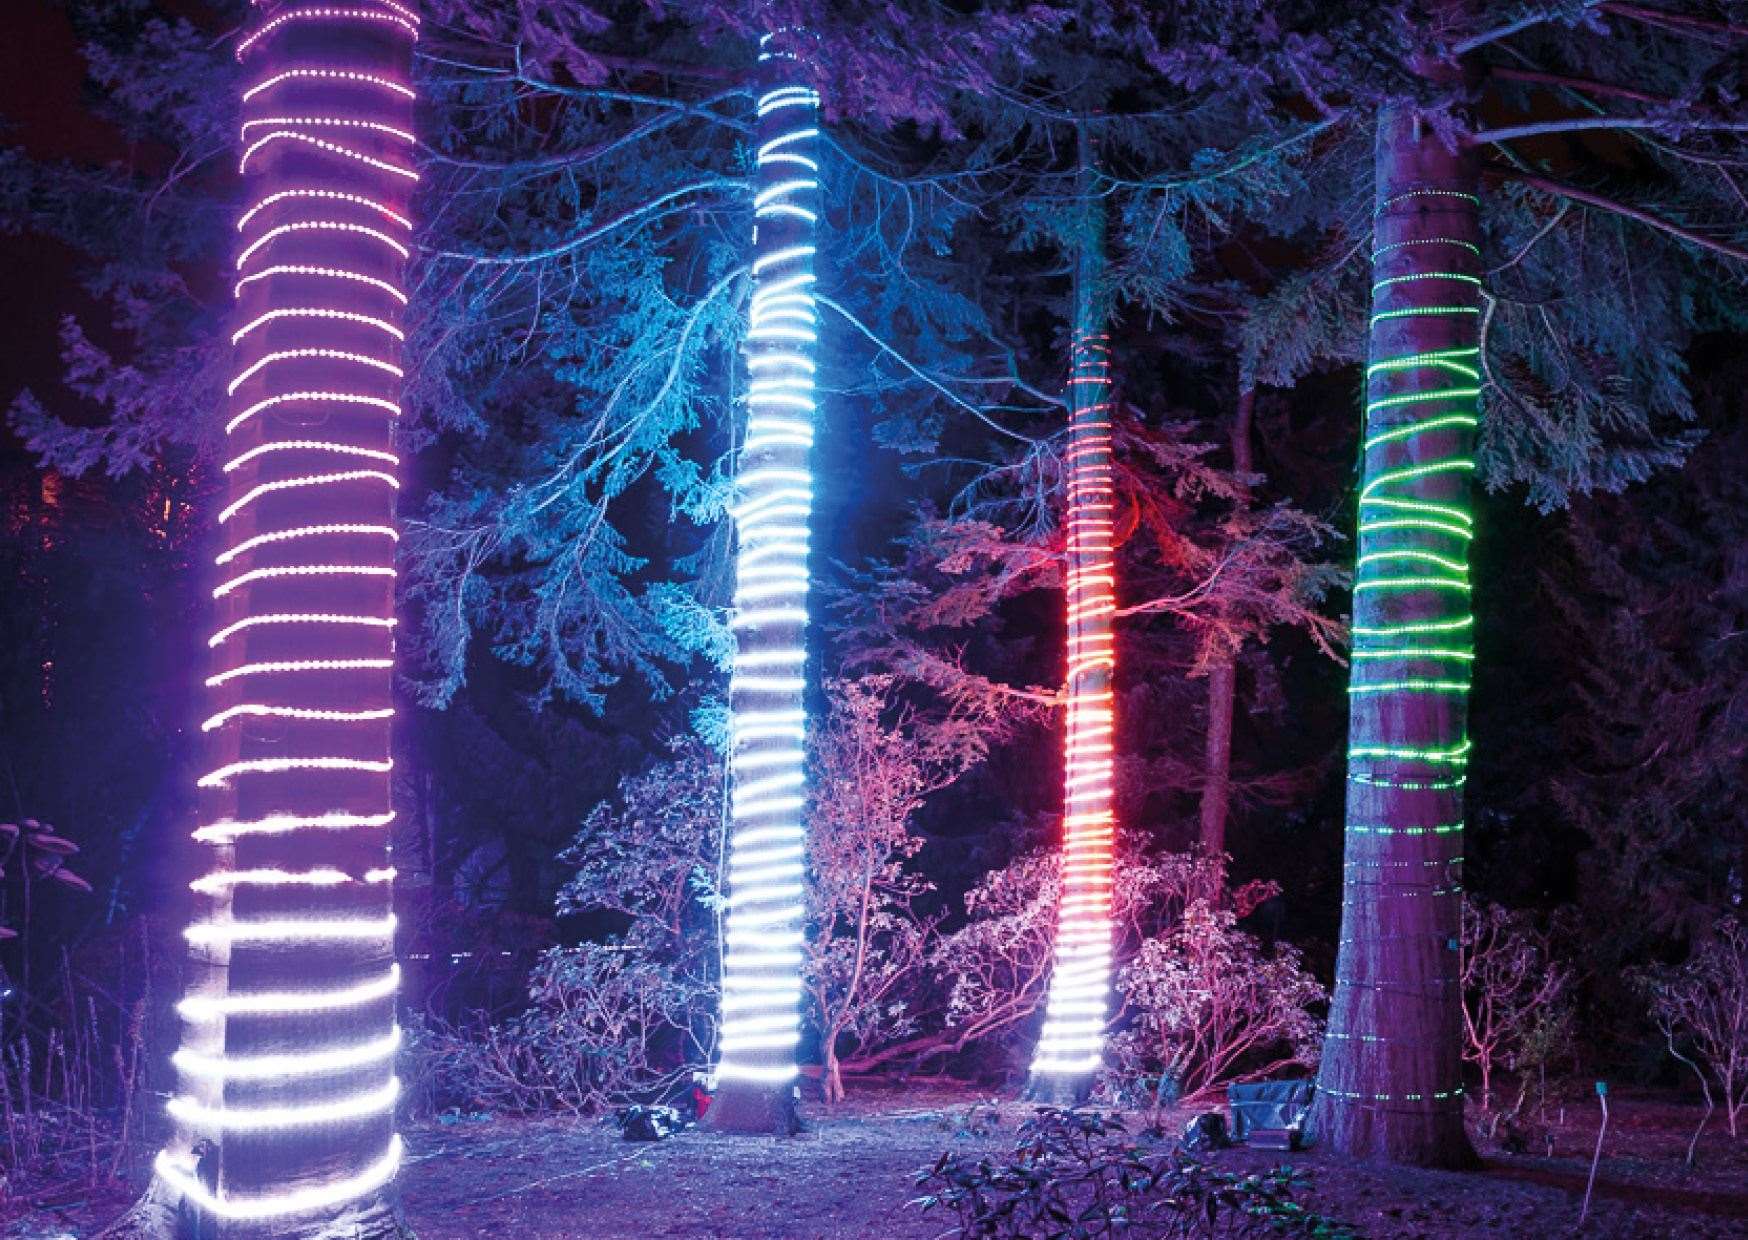 Forest of Festive Lights at Bedgebury Pinetum in Goudhurst